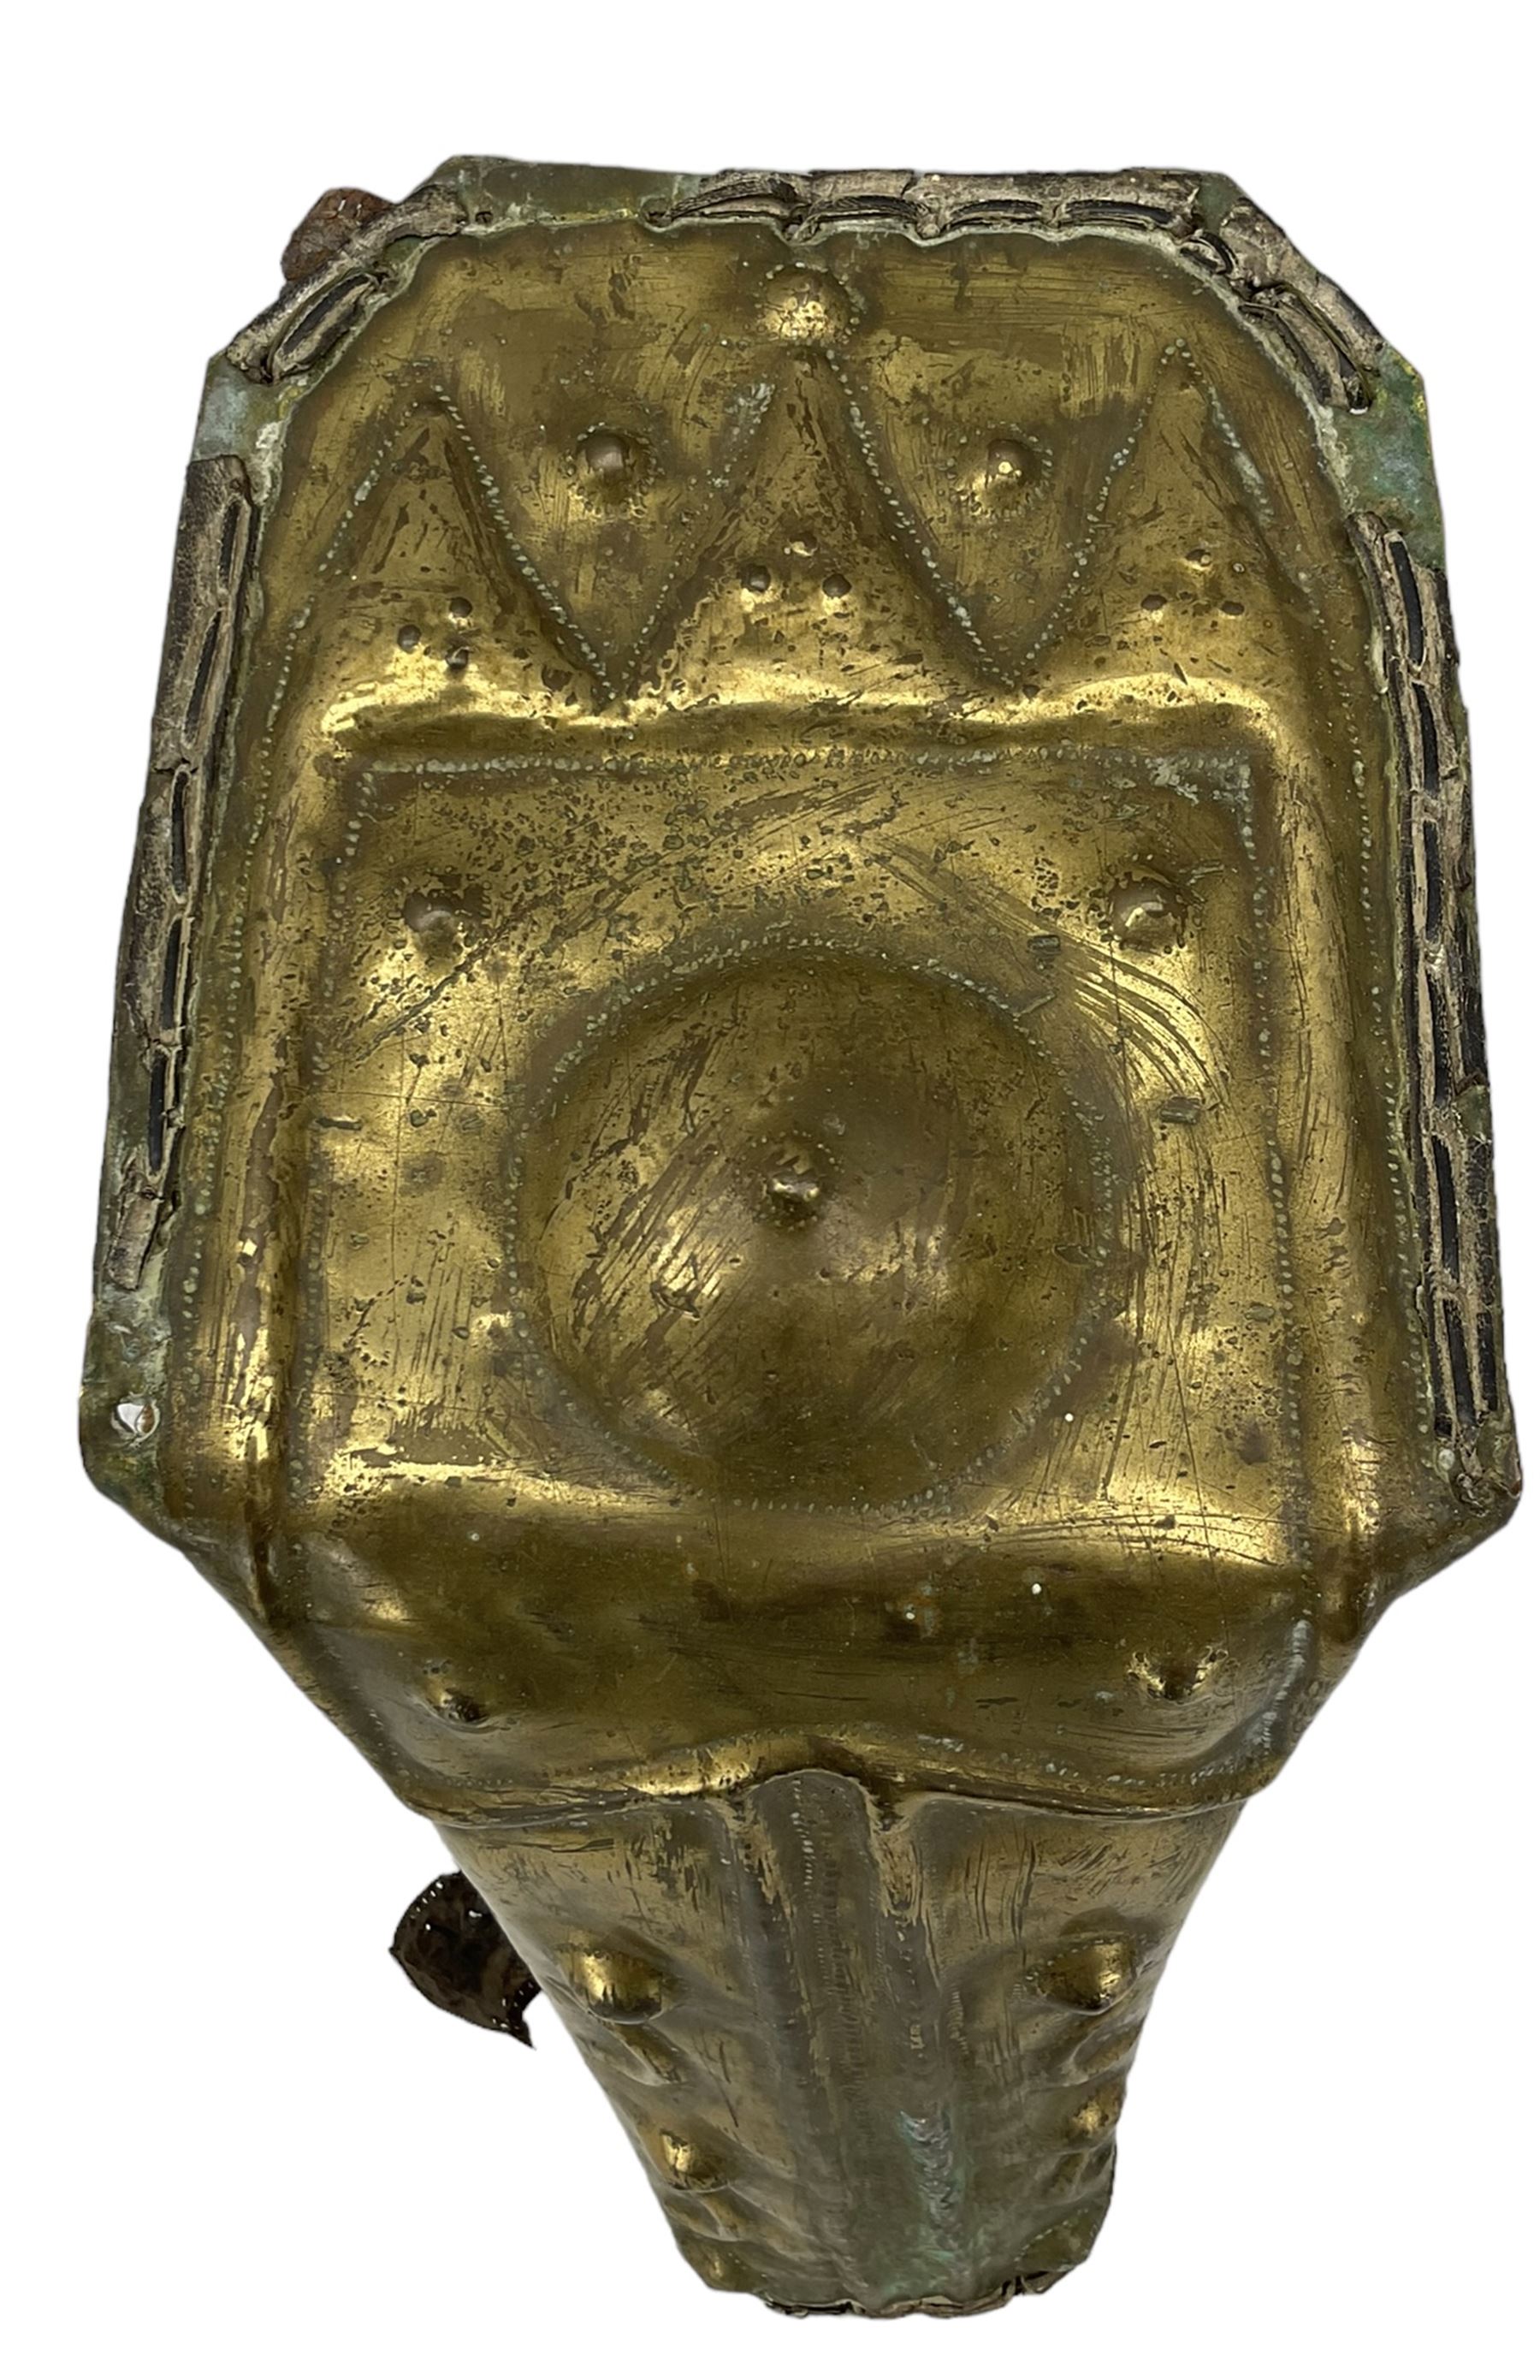 19th century Sudanese brass camel Chanfron with raised decoration - Image 2 of 4